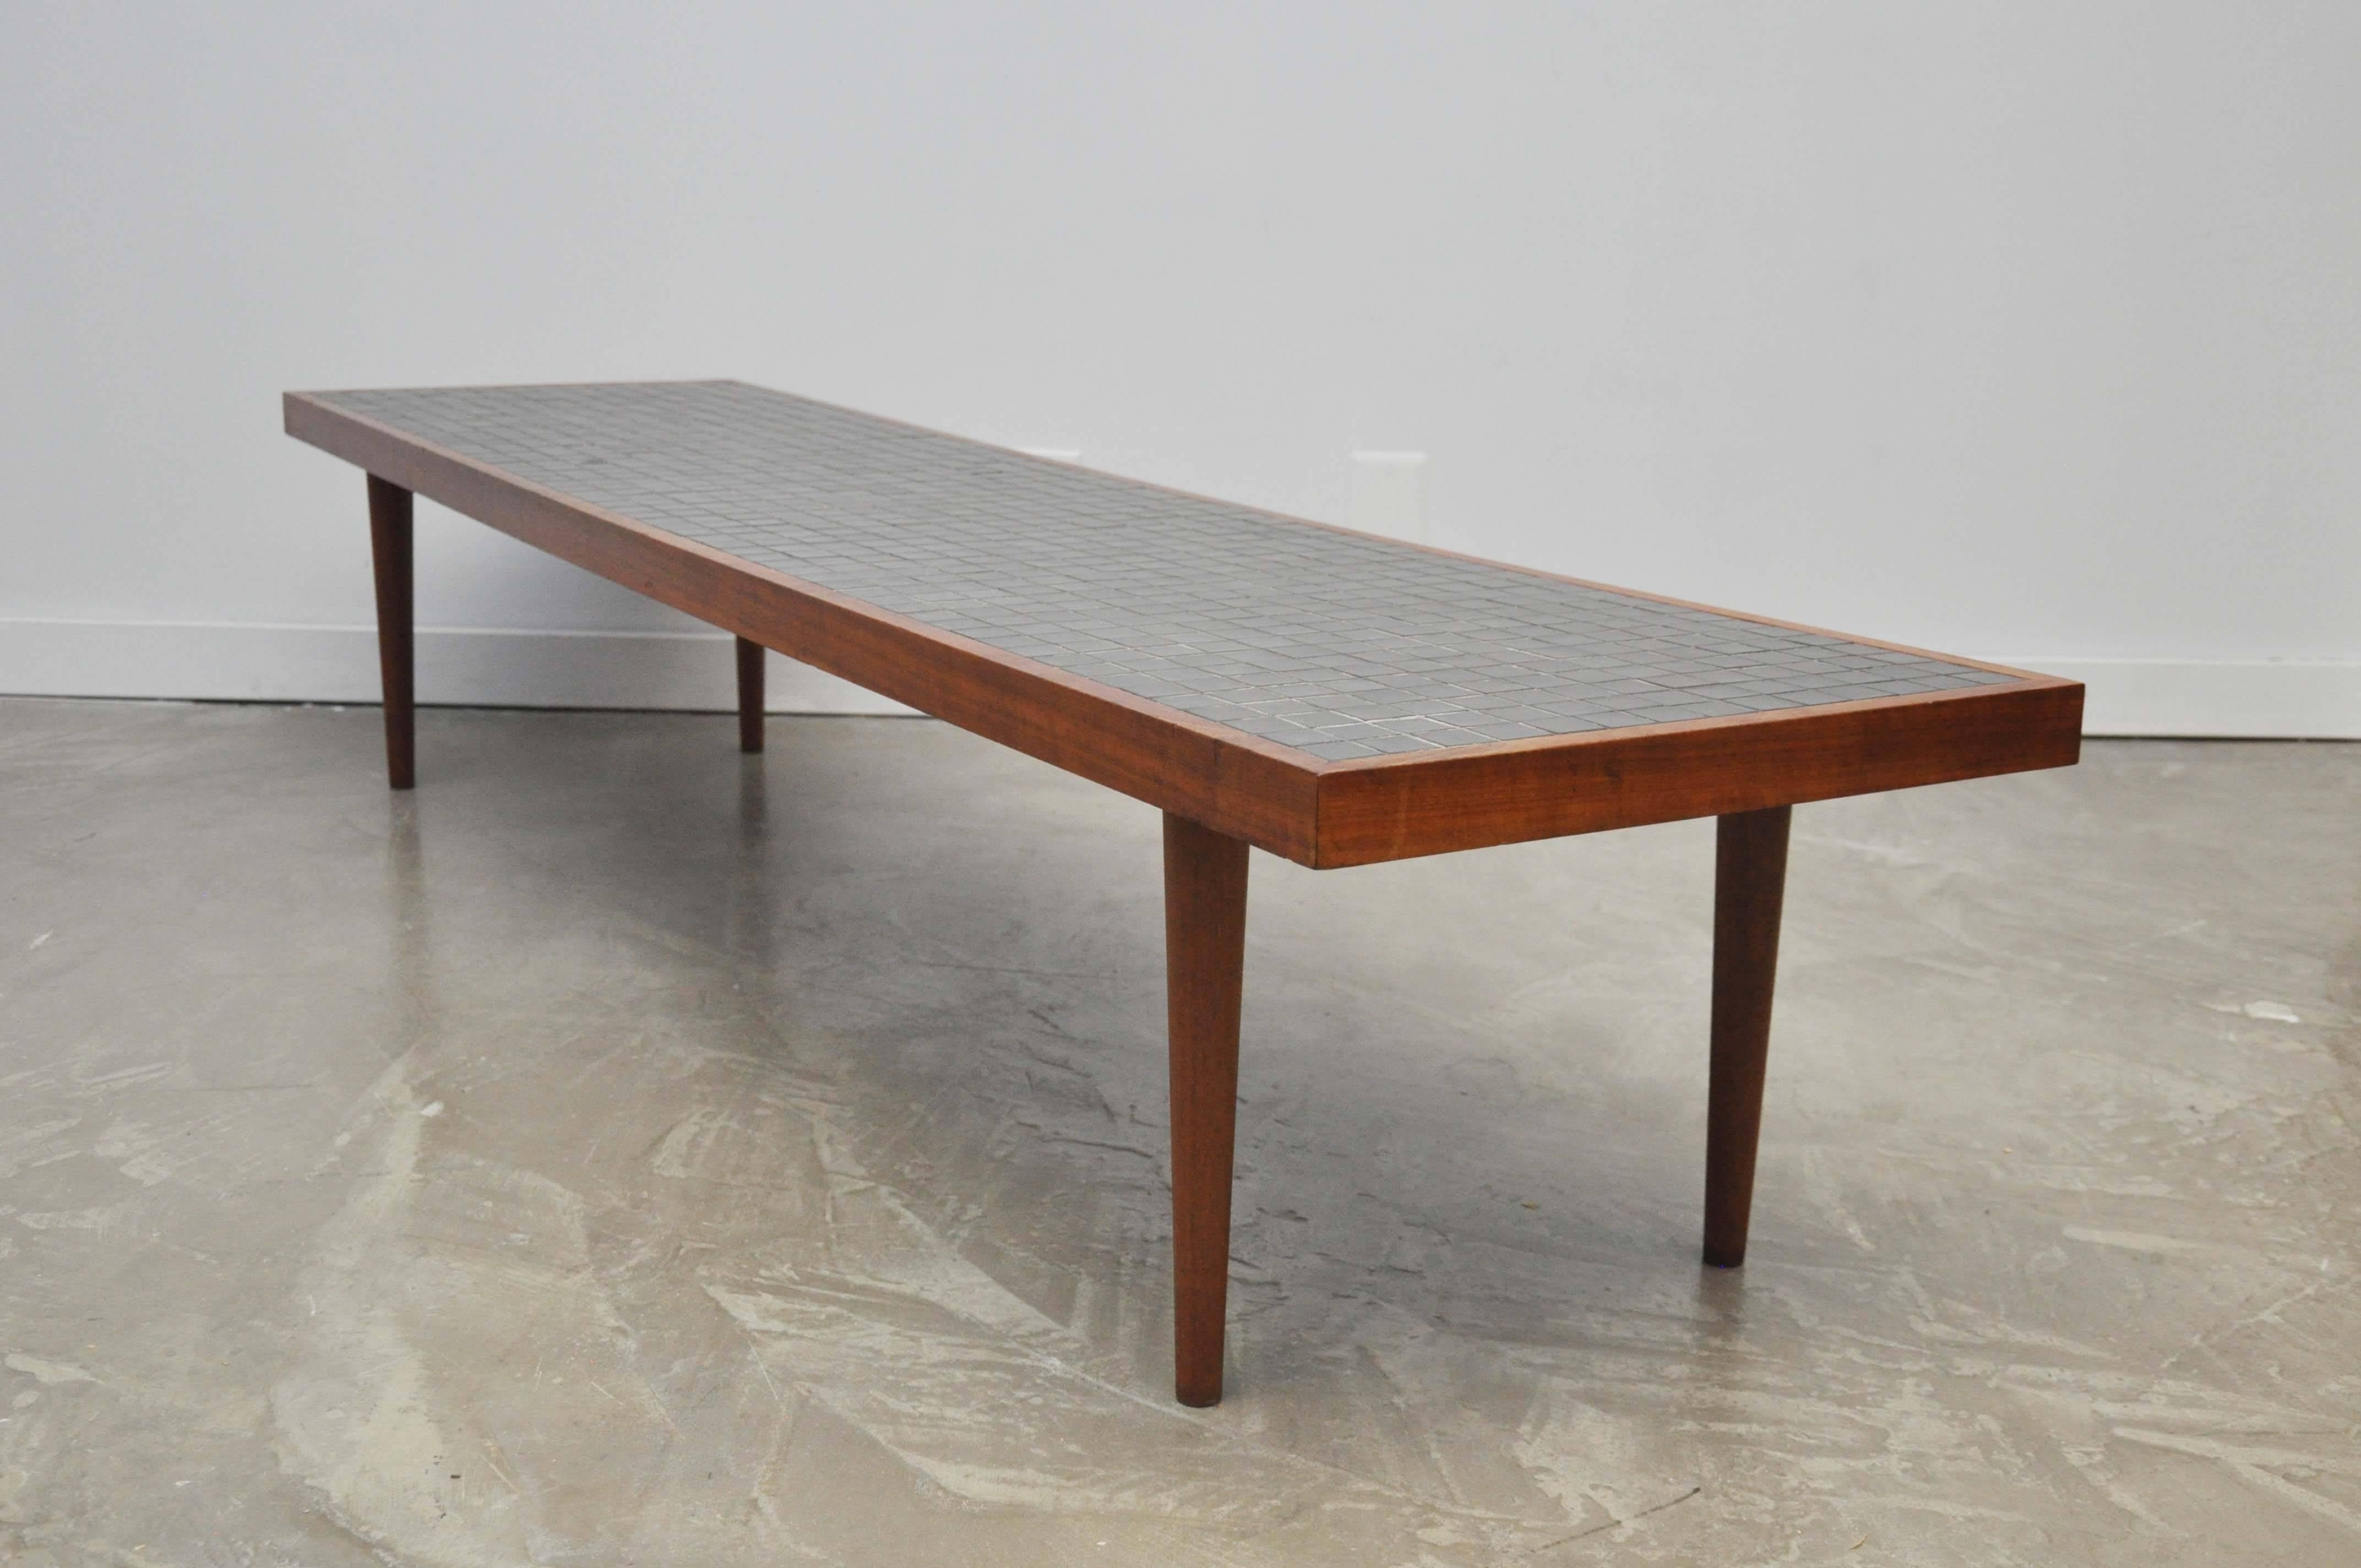 20th Century Coffee Table by Gordon and Jane Martz for Marshall Studios